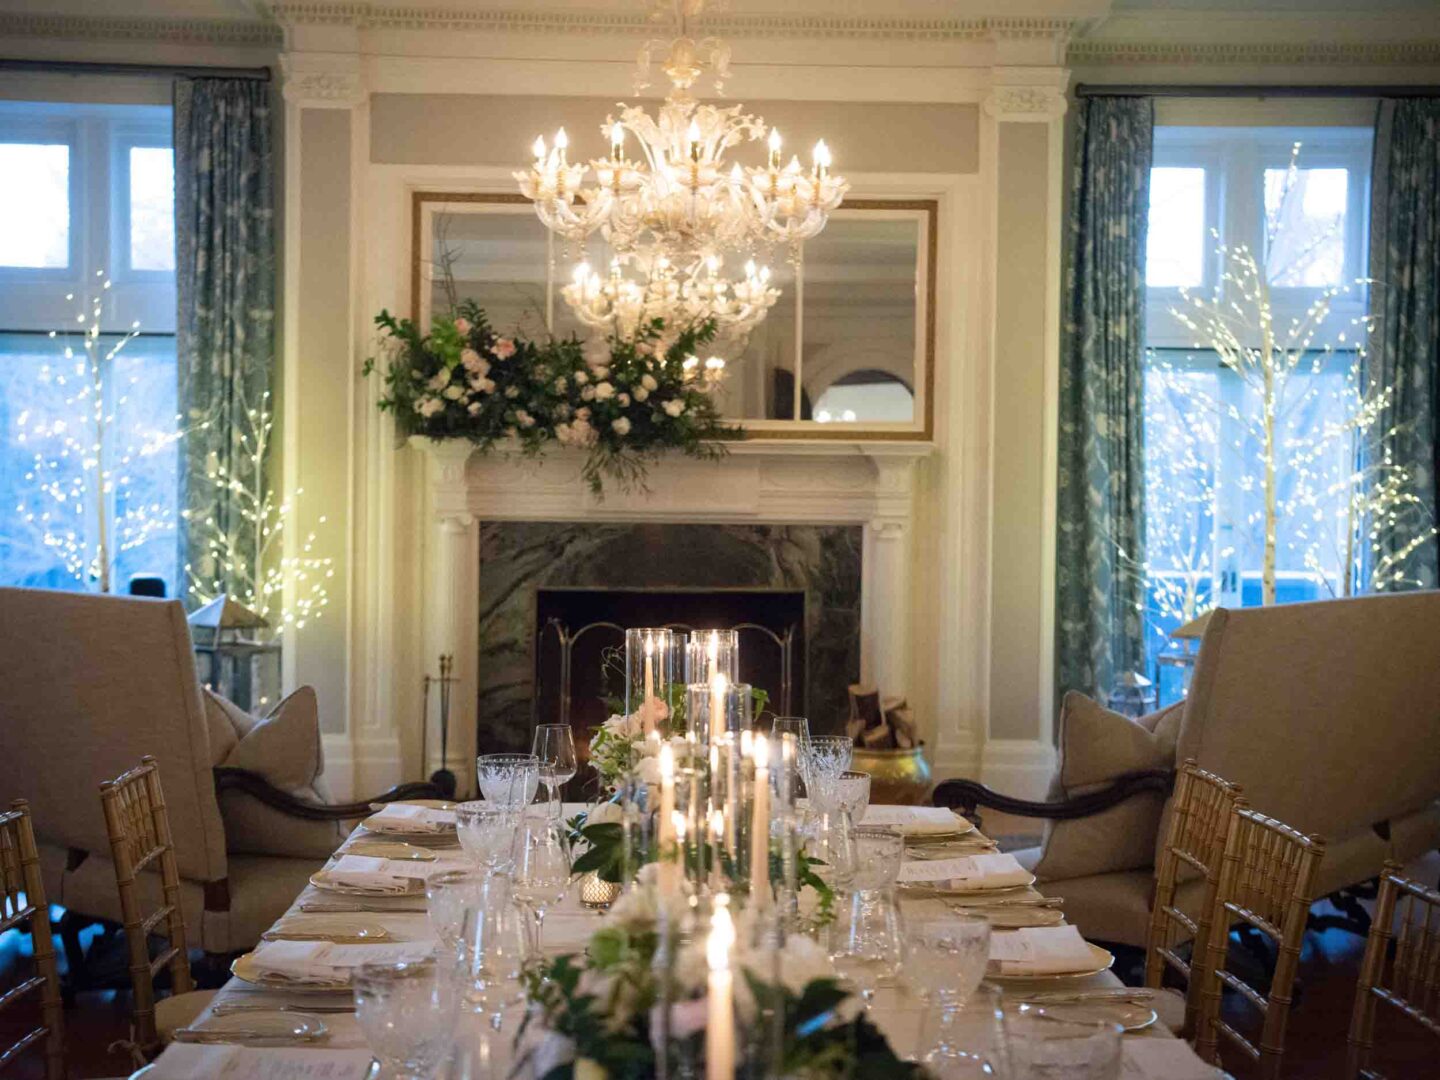 Tablescape with beautiful florals, cozy fireplace in the background and sparkly lit birch trees 